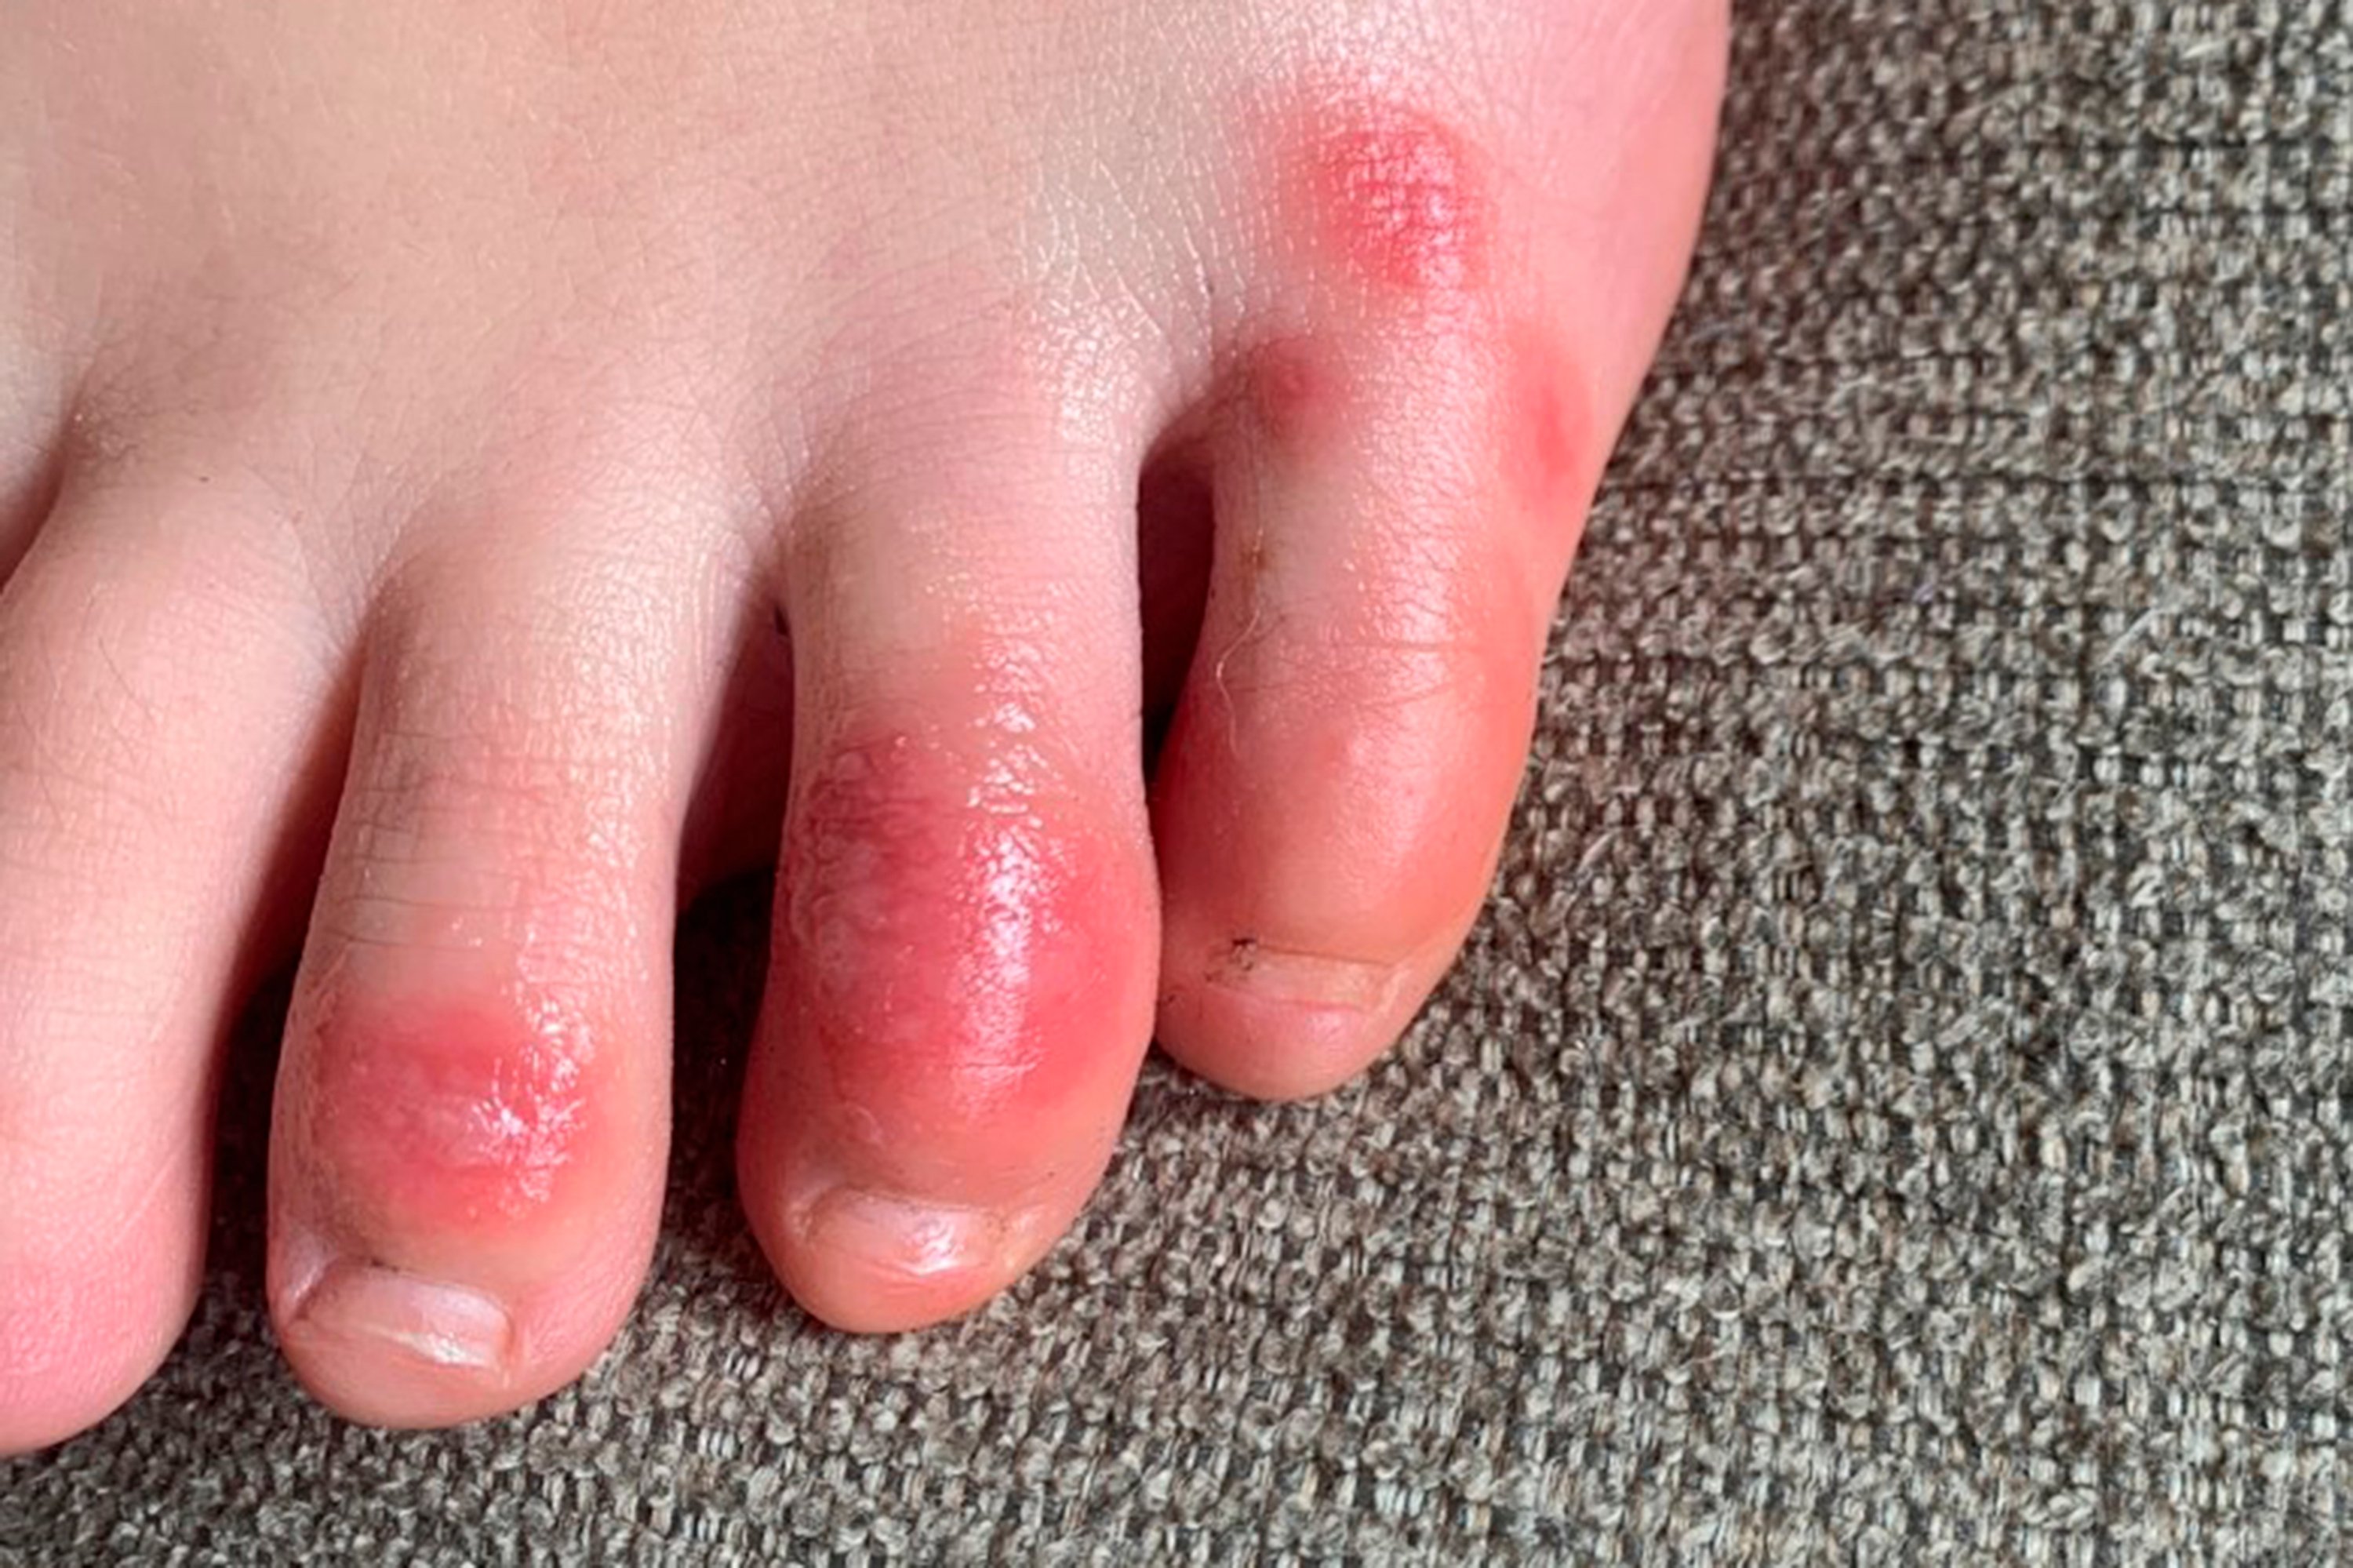  This photo provided by Northwestern University shows discoloration on a teenage patient's toes at the onset of the condition informally called 